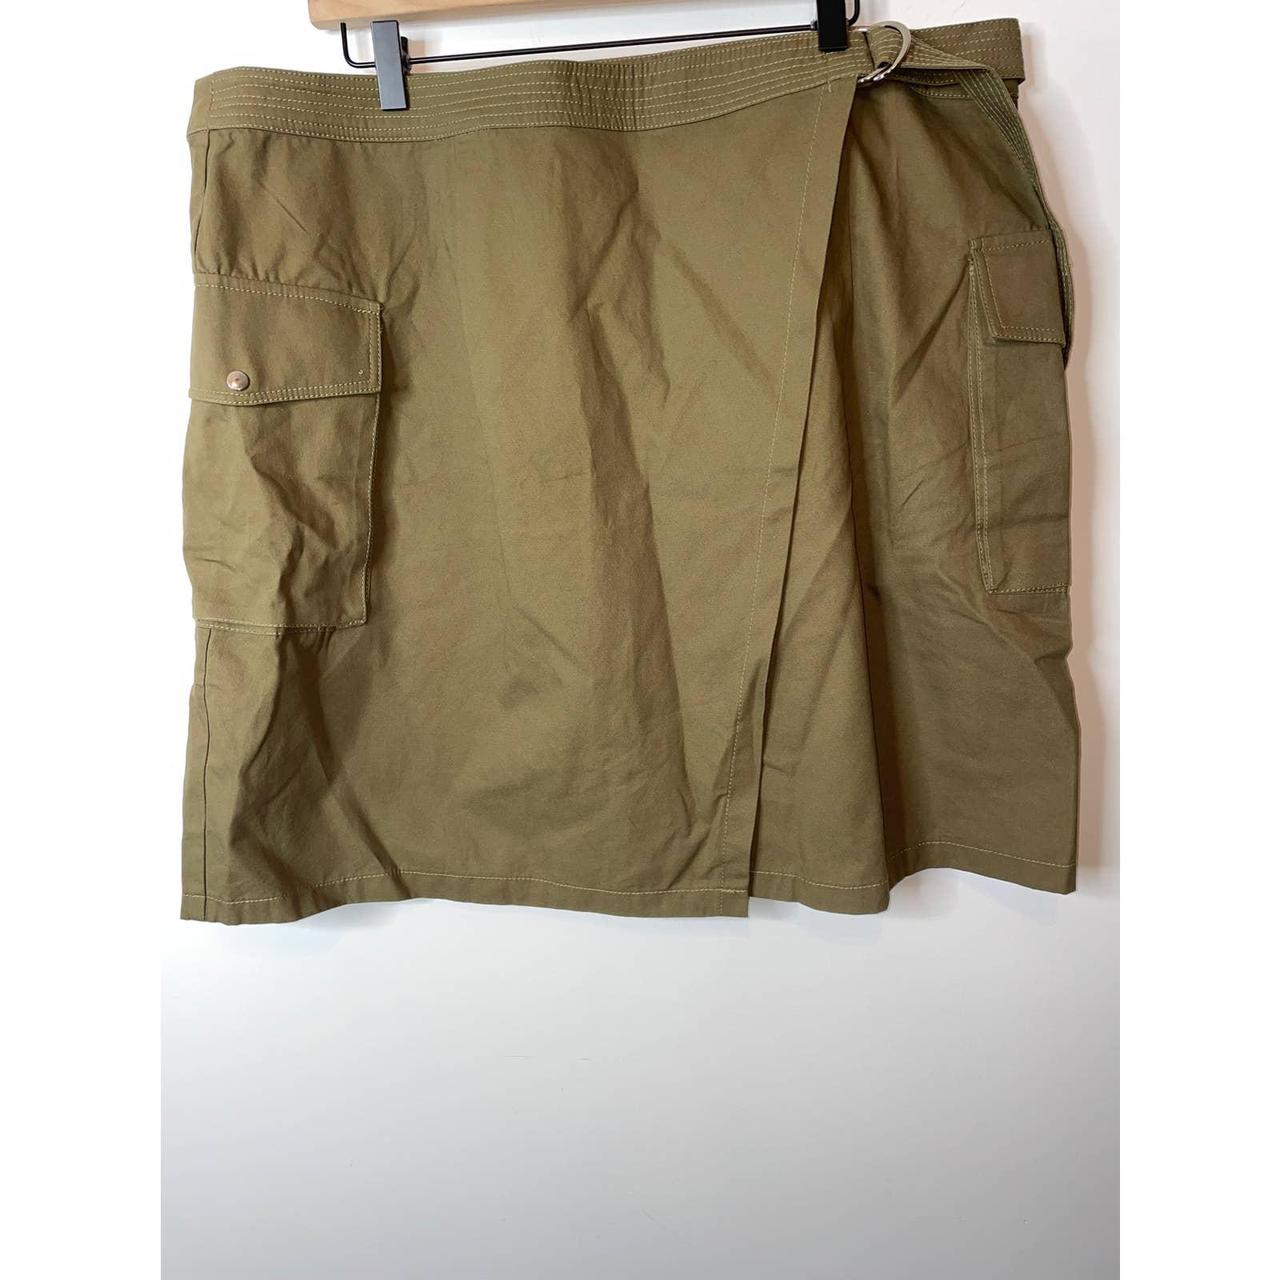 Product Image 3 - City Chic
Khaki
Green in color
High waisted
Pockets
Belted
Above